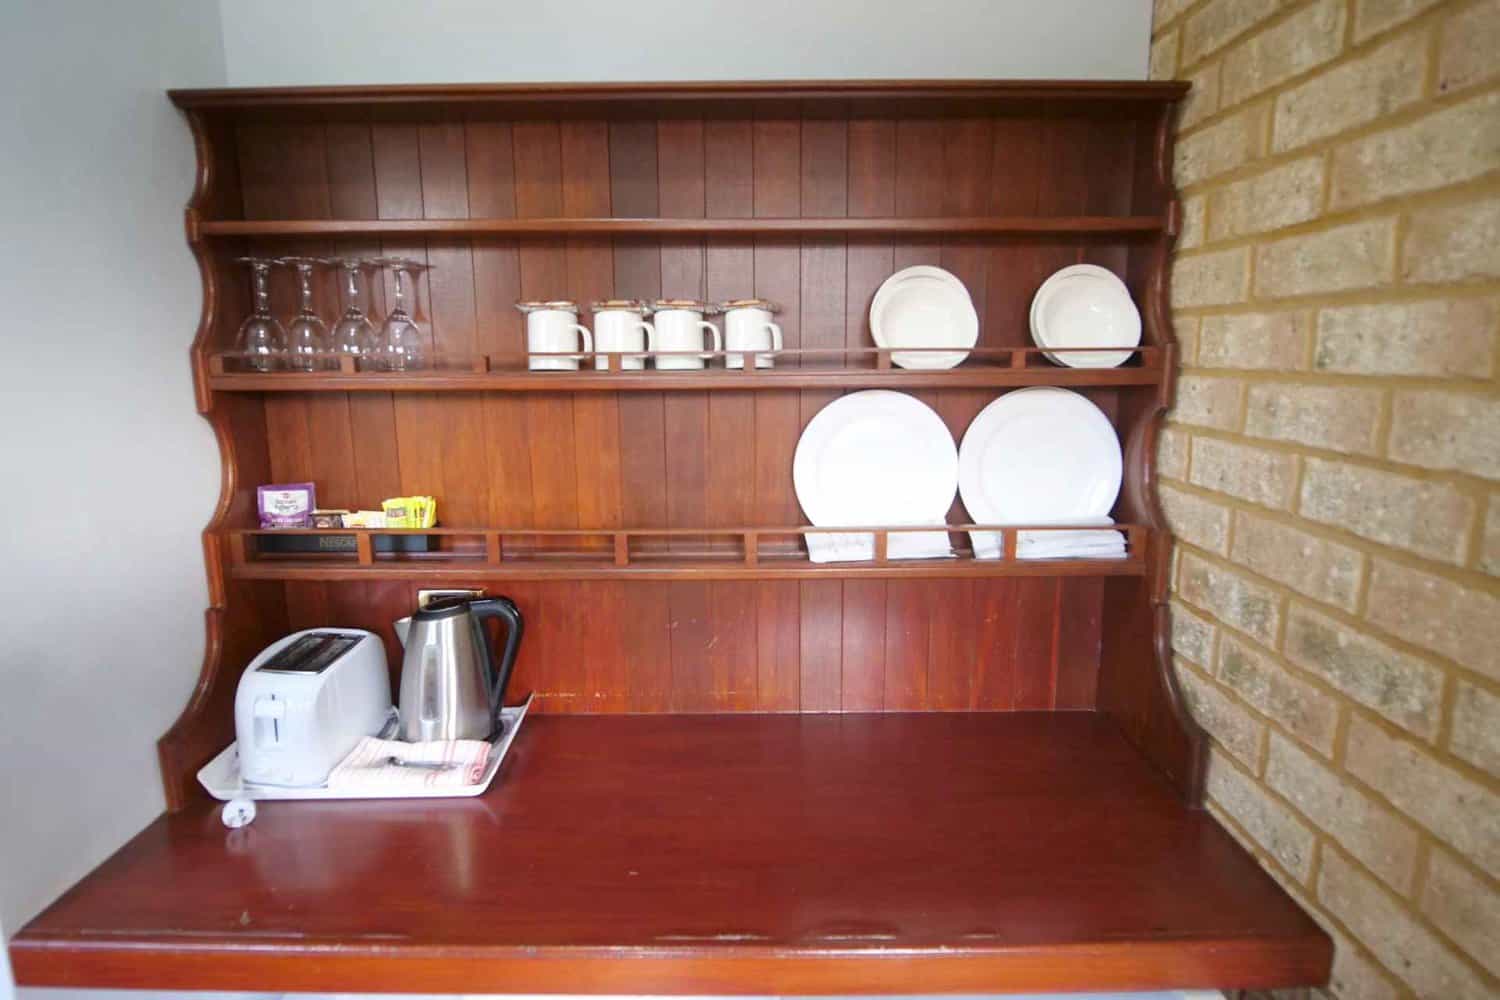 A wooden sideboard with an upper shelf displaying a neat arrangement of glassware and white ceramic dishes. Below on the countertop, there's an electric kettle, a toaster, and some tea and coffee provisions, suggesting a self-catering accommodation setup. The sideboard is adjacent to a brick wall, adding a rustic touch to the space.